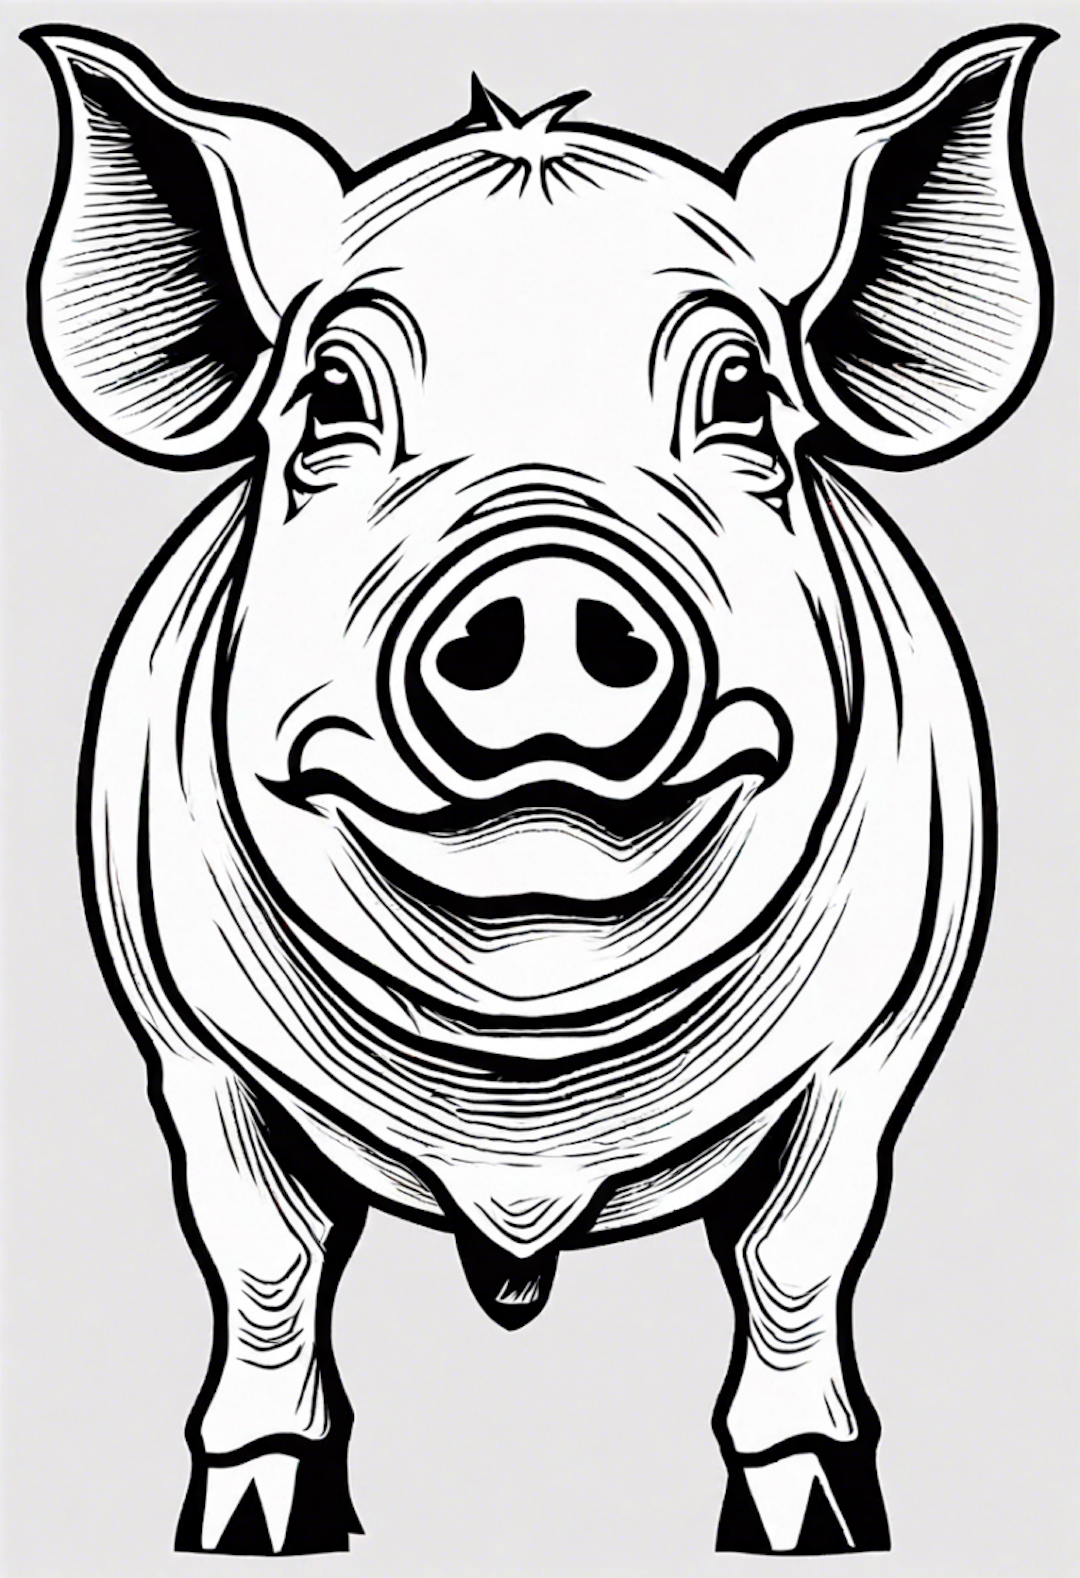 Friendly Pig Coloring Page coloring pages